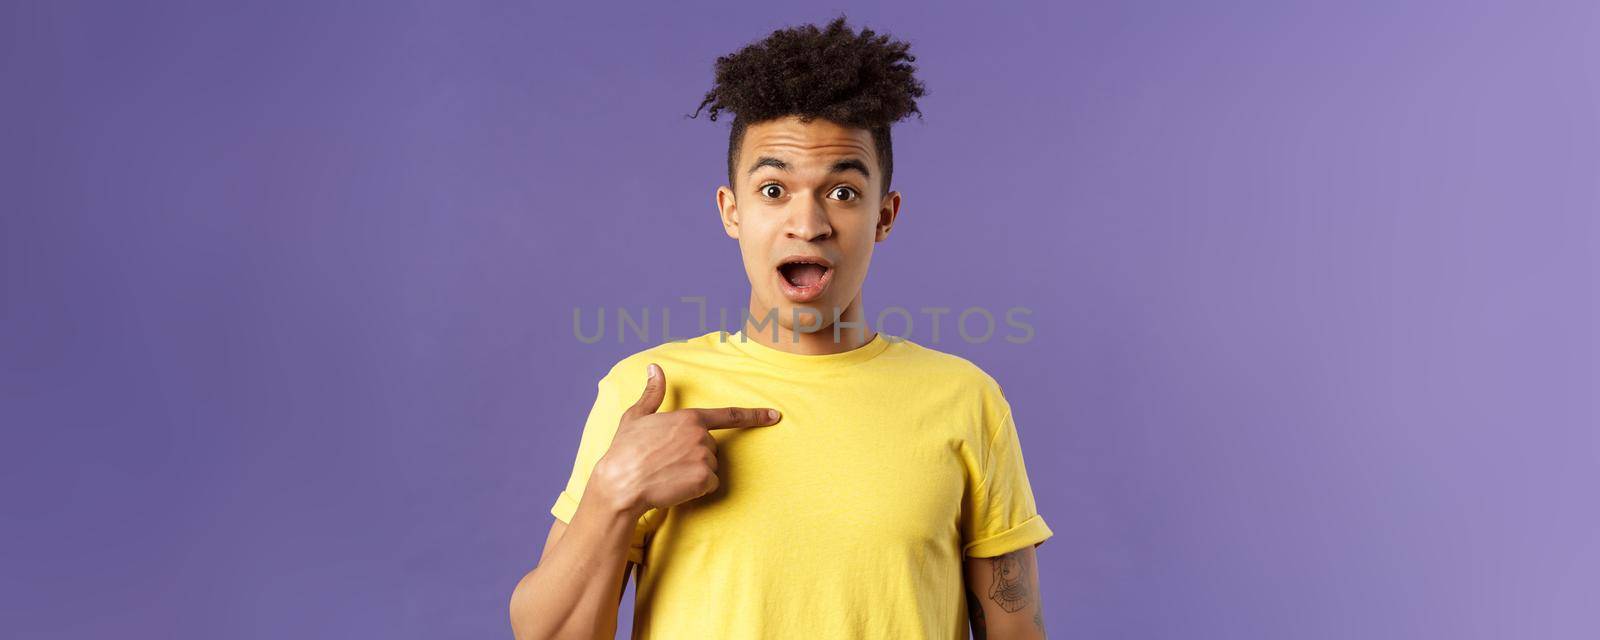 Who me, no way. Portrait of surprised, happy rejoicing young man looking with disbelies as being chosen from all candidates, pointing at himself open mouth fascinated, purple background by Benzoix